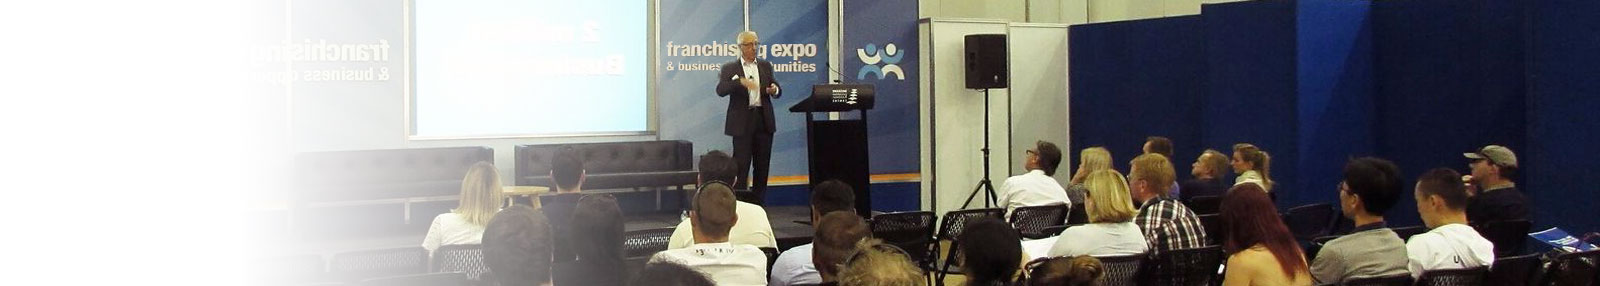 Brian Keen on stage presenting at the expo